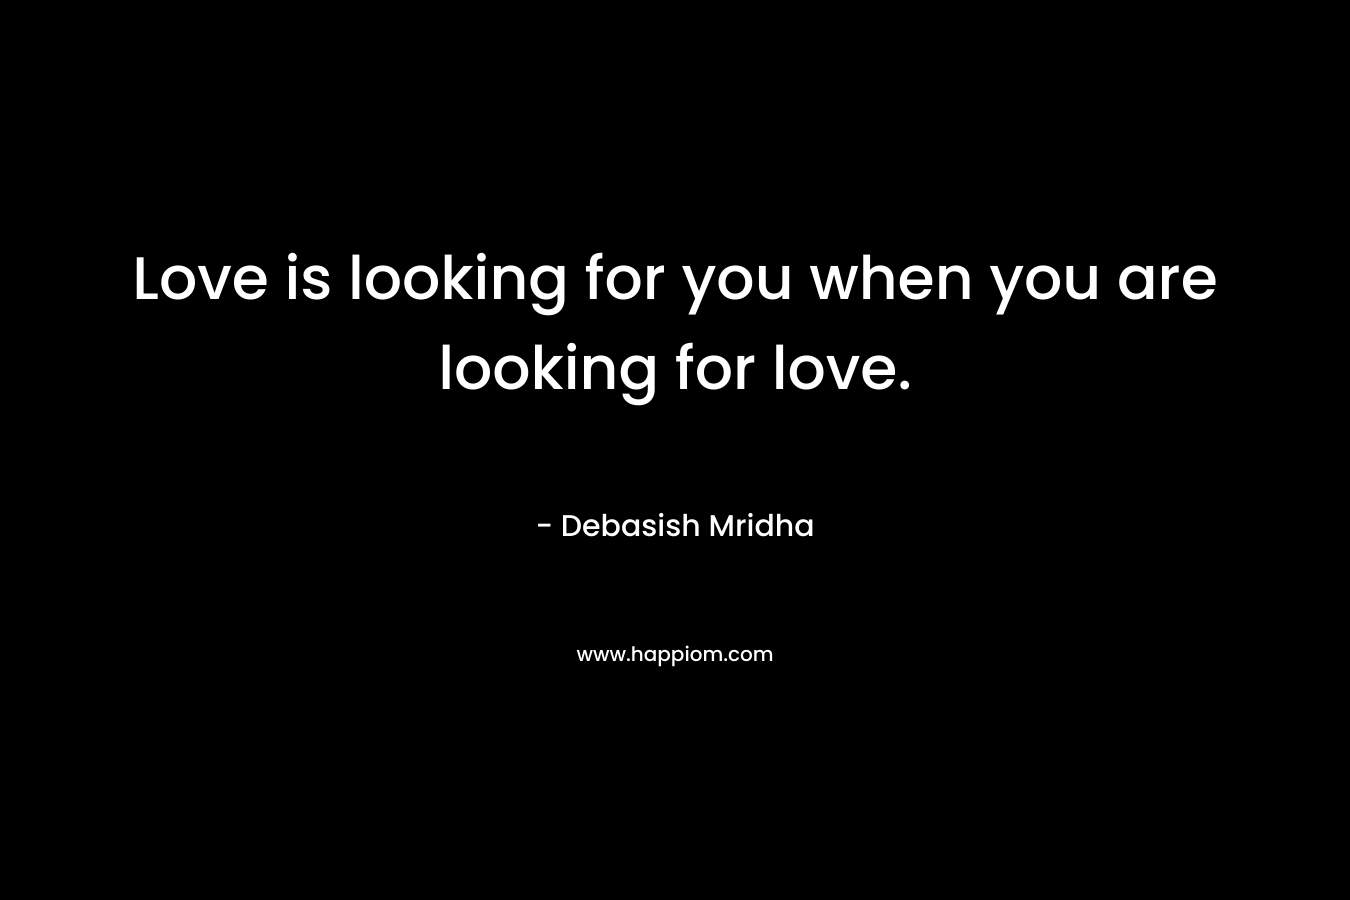 Love is looking for you when you are looking for love.